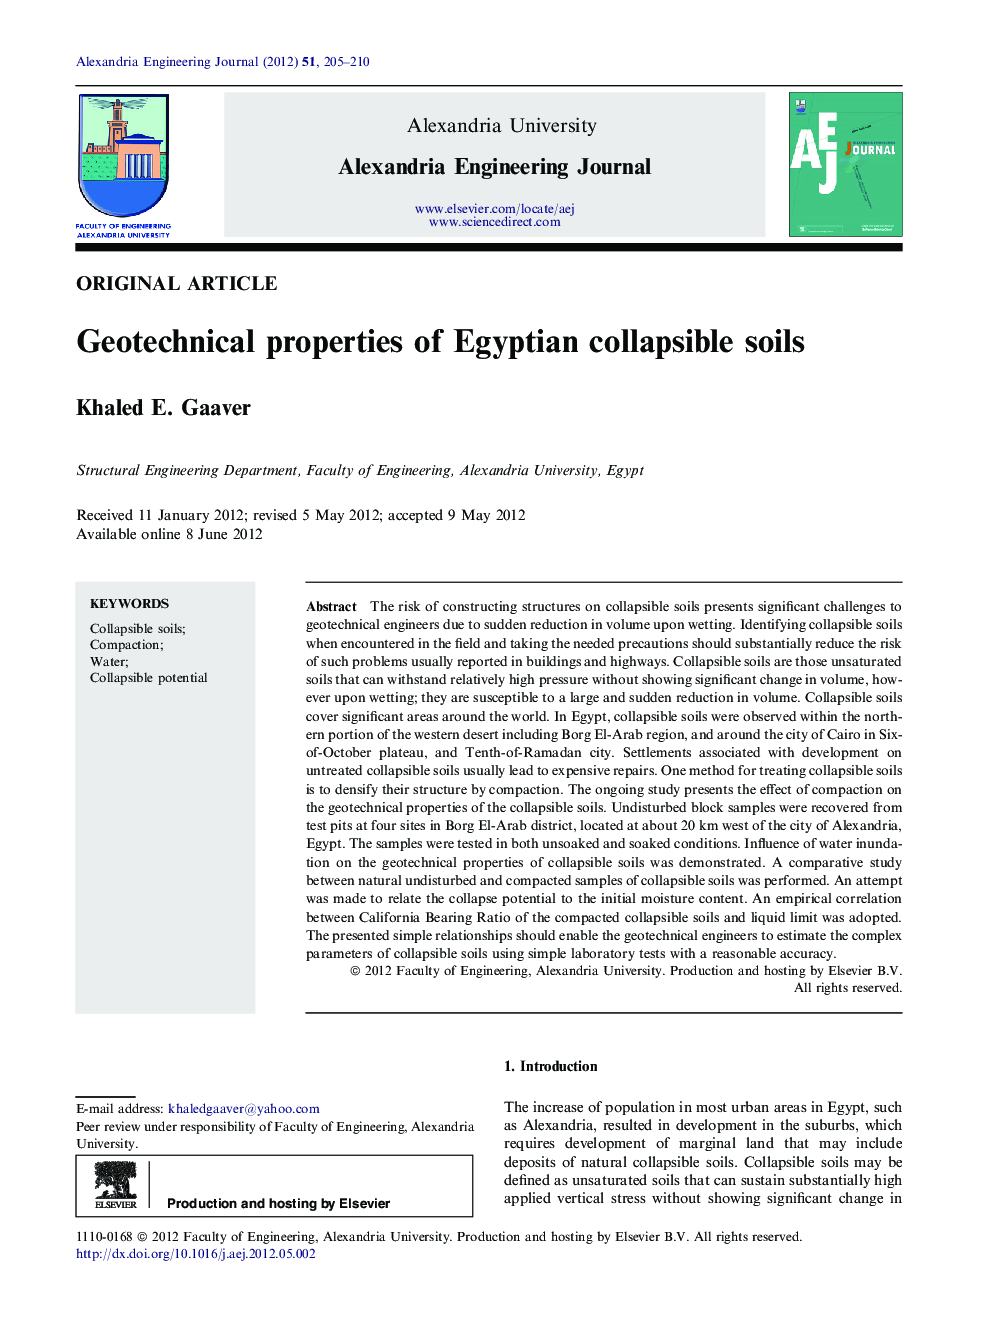 Geotechnical properties of Egyptian collapsible soils